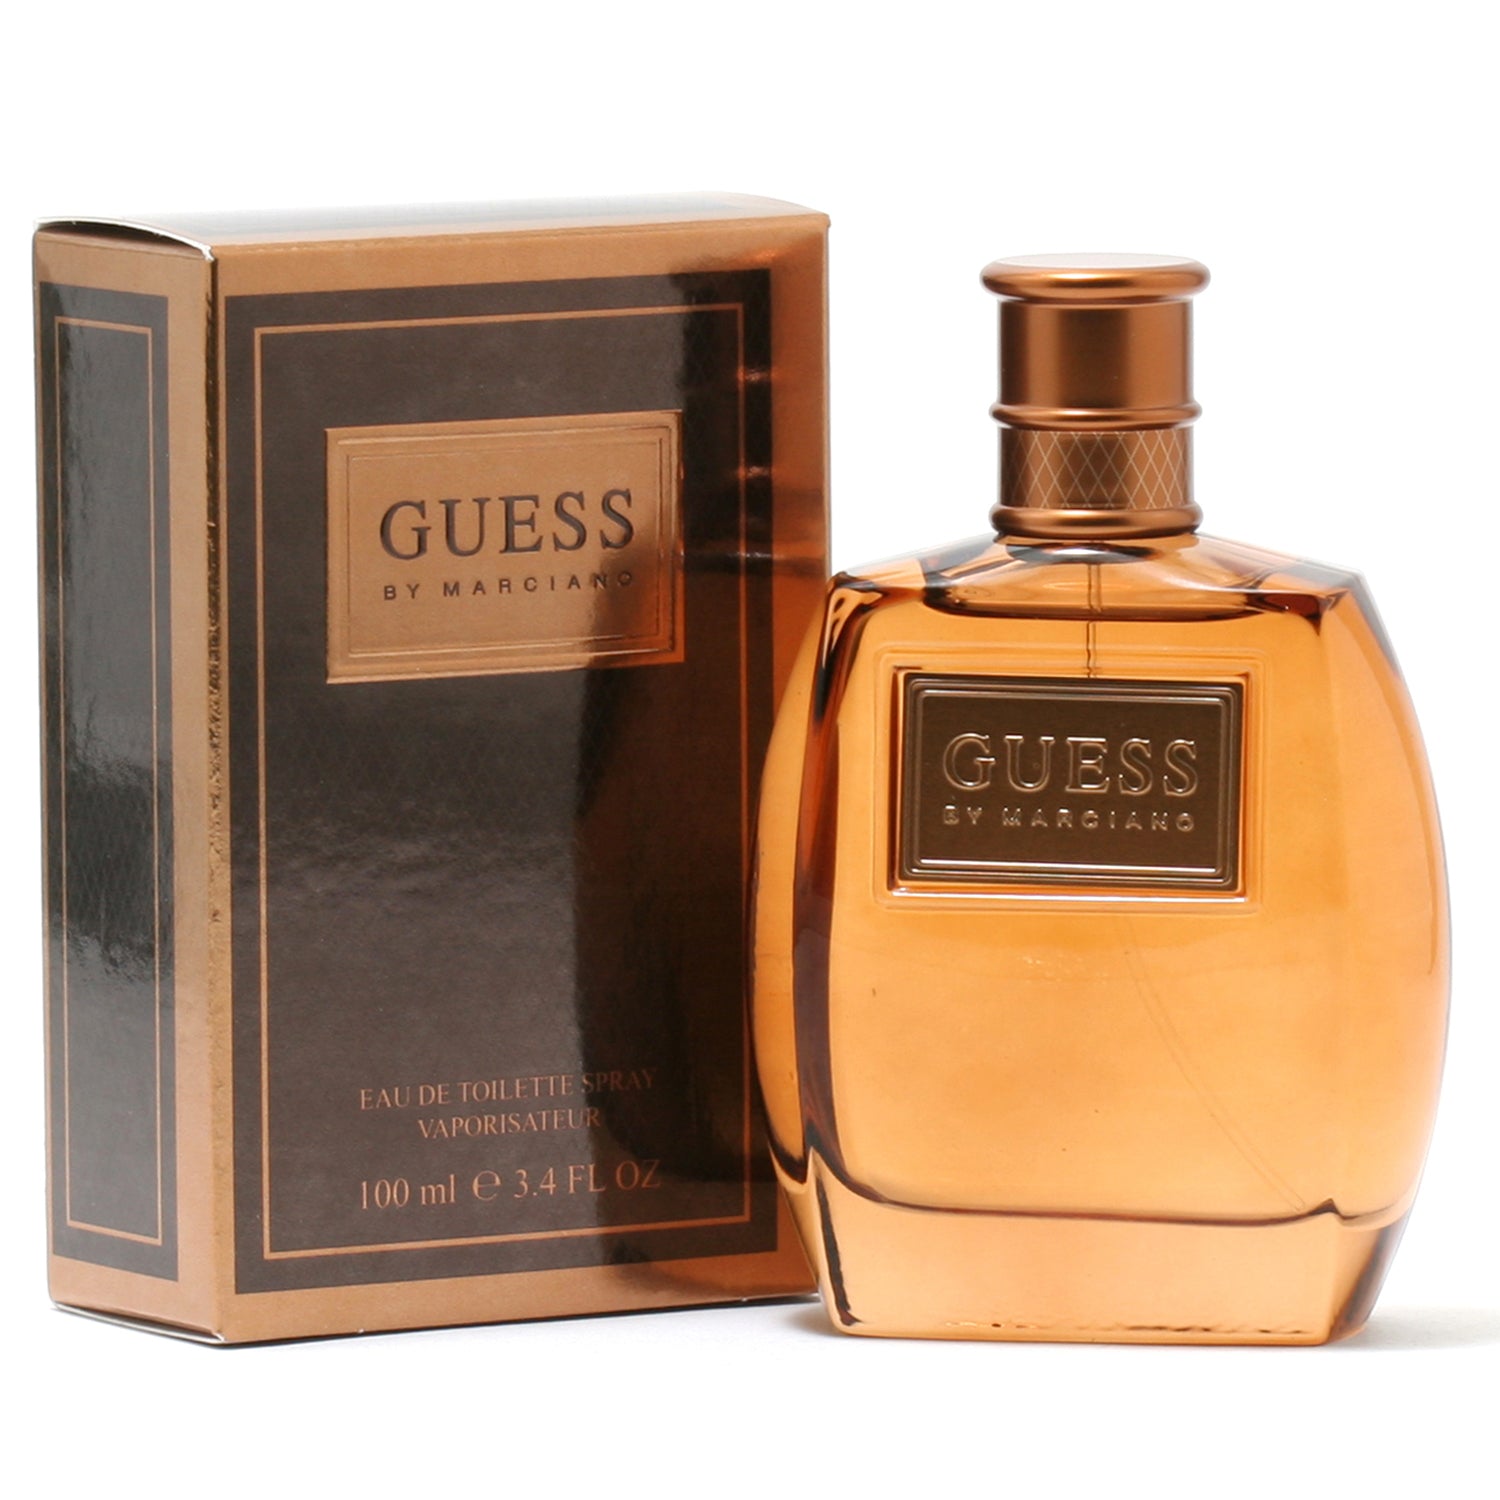 Guess by Marciano for Men EDT - Perfume Planet 